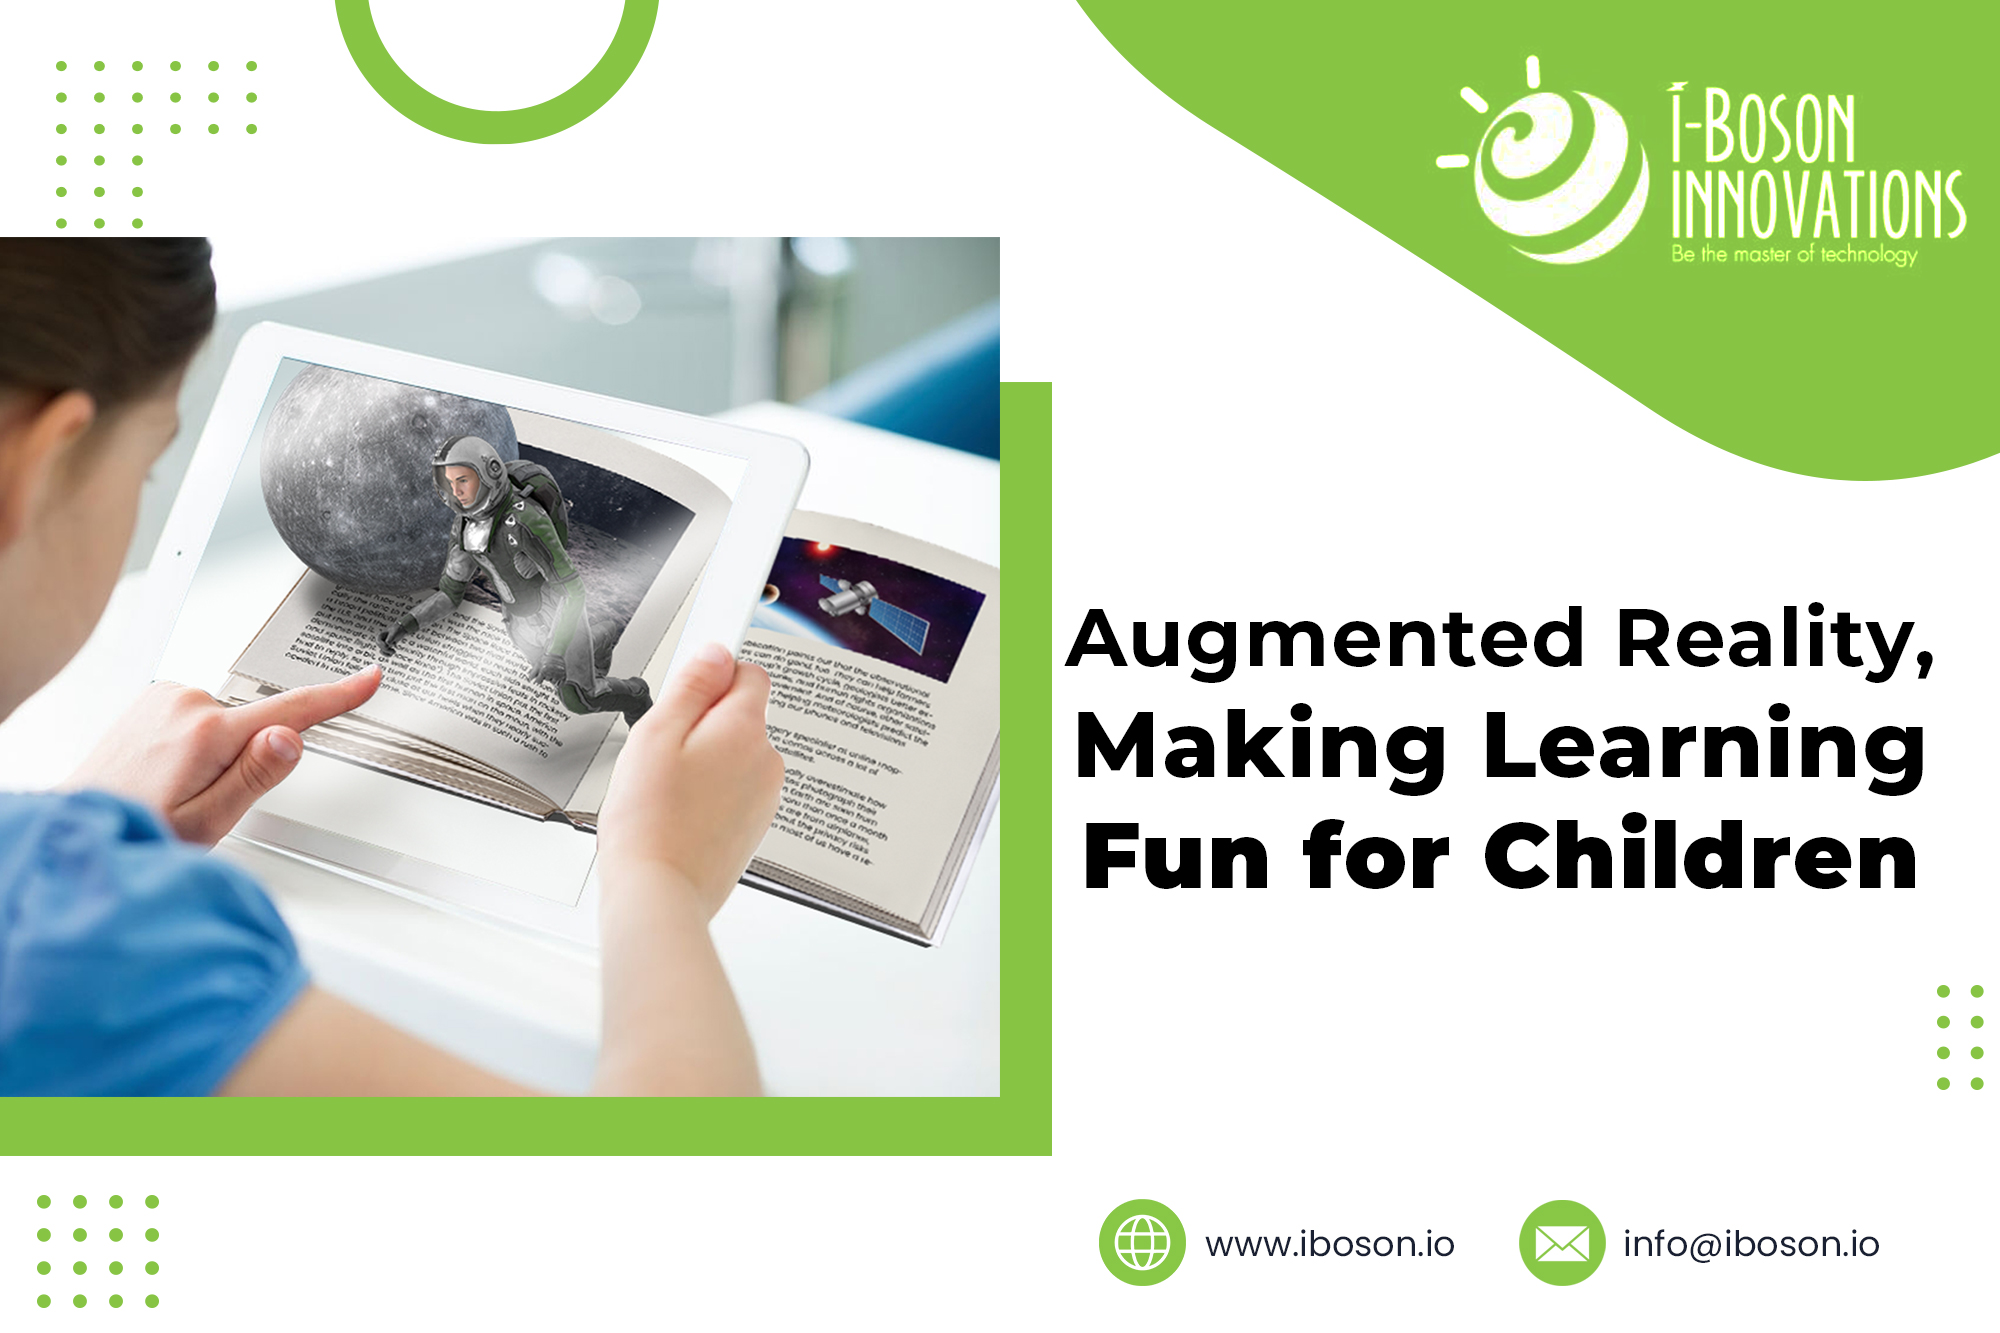 Augmented reality for education of children
                        